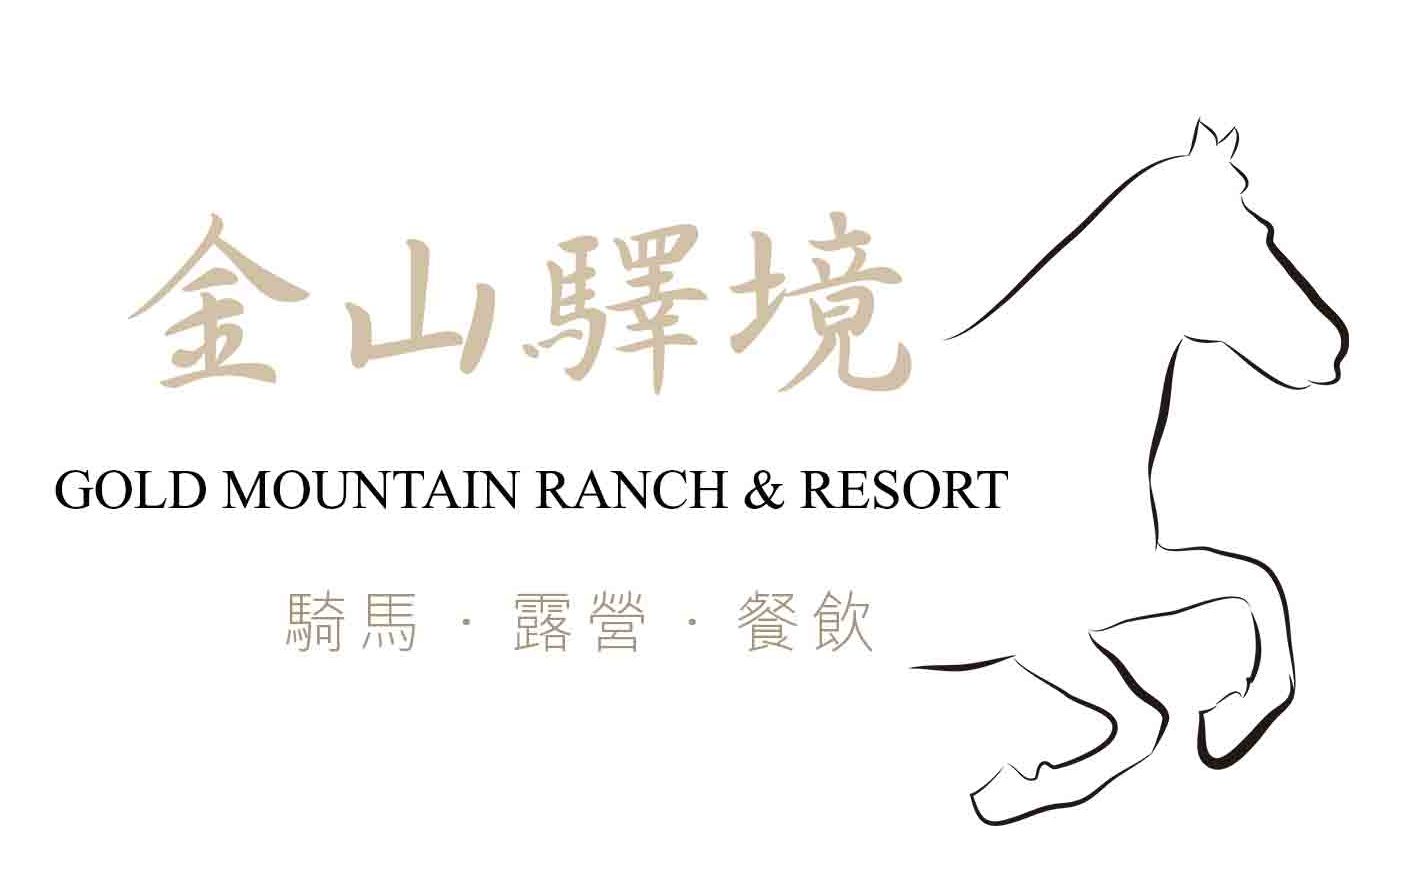 Gold Mountain Ranch & Resort |   Our Story